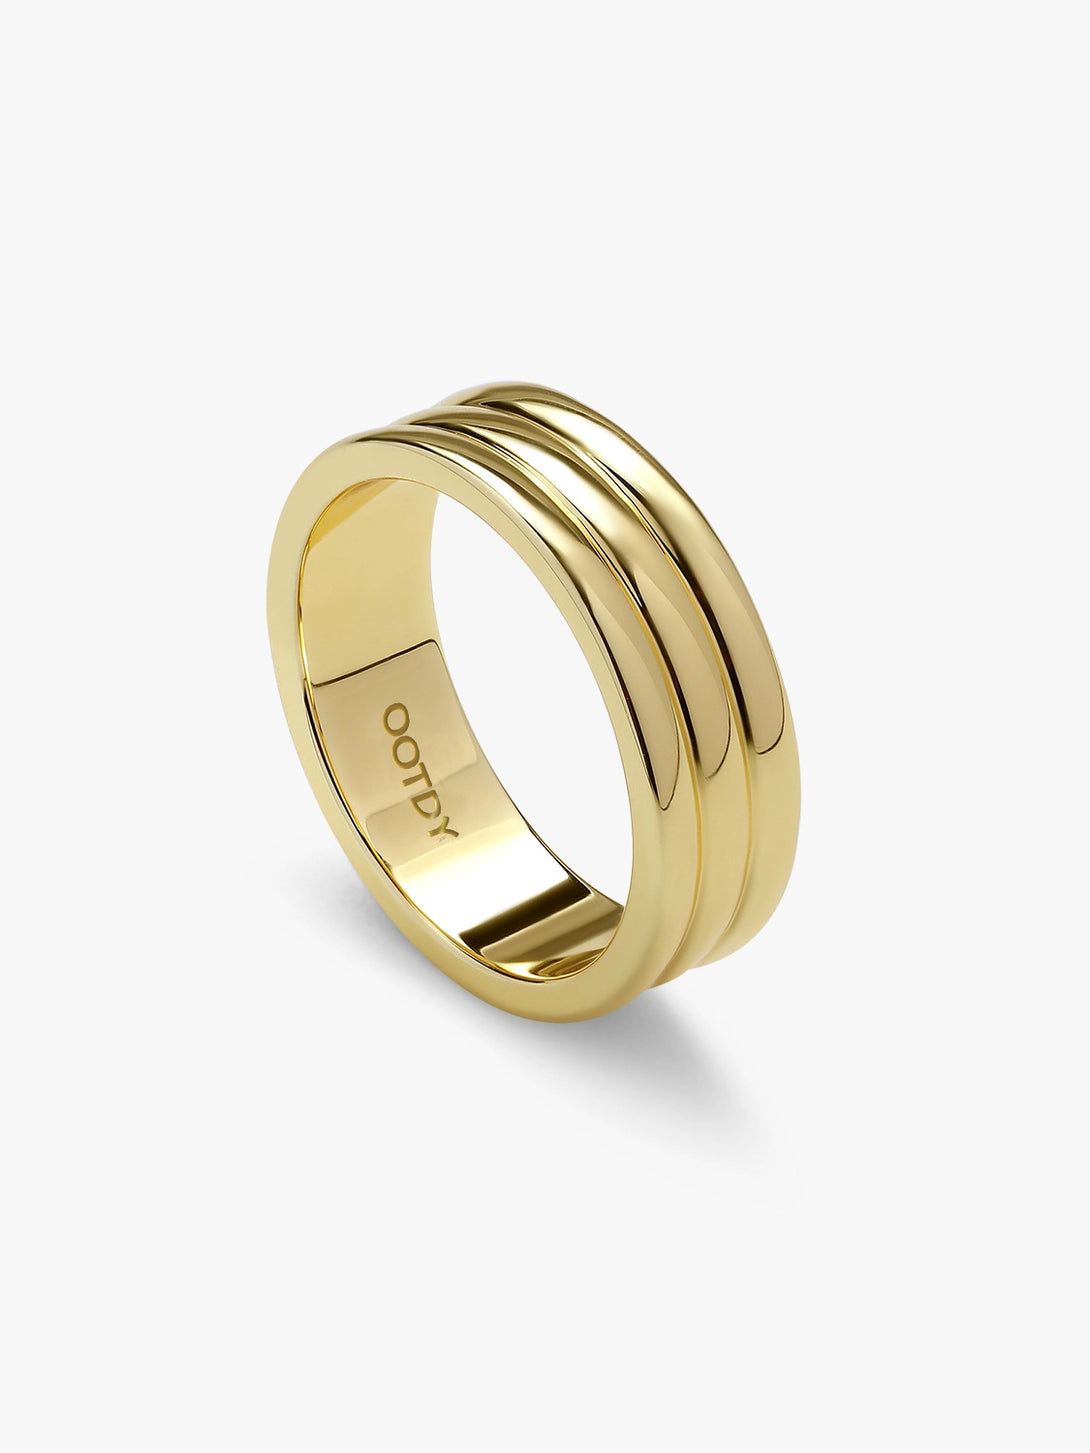 Classical Round Band Ring - OOTDY